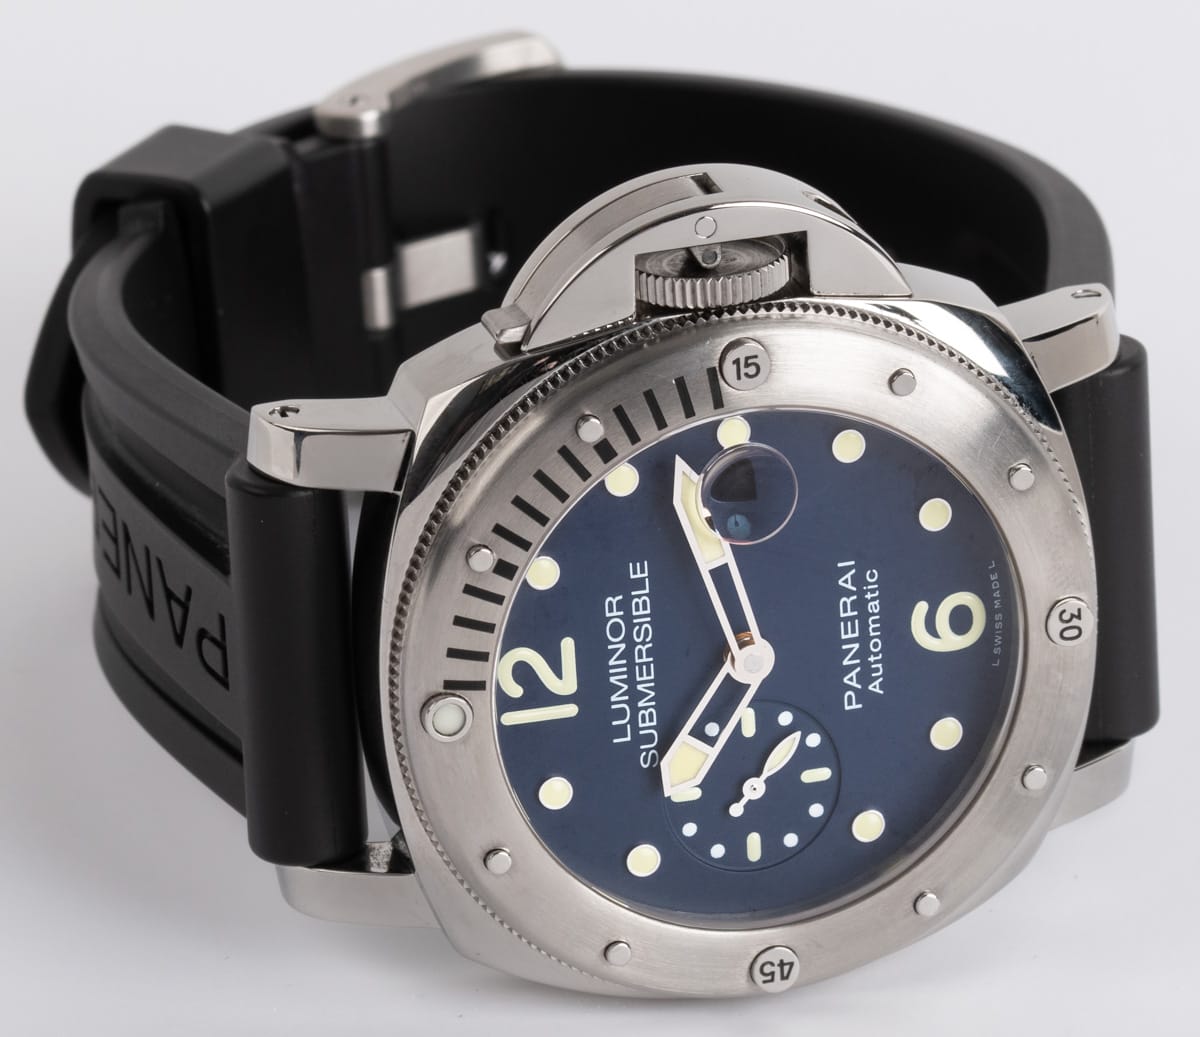 Front View of Luminor Submersible E-Boutique Limited Edition